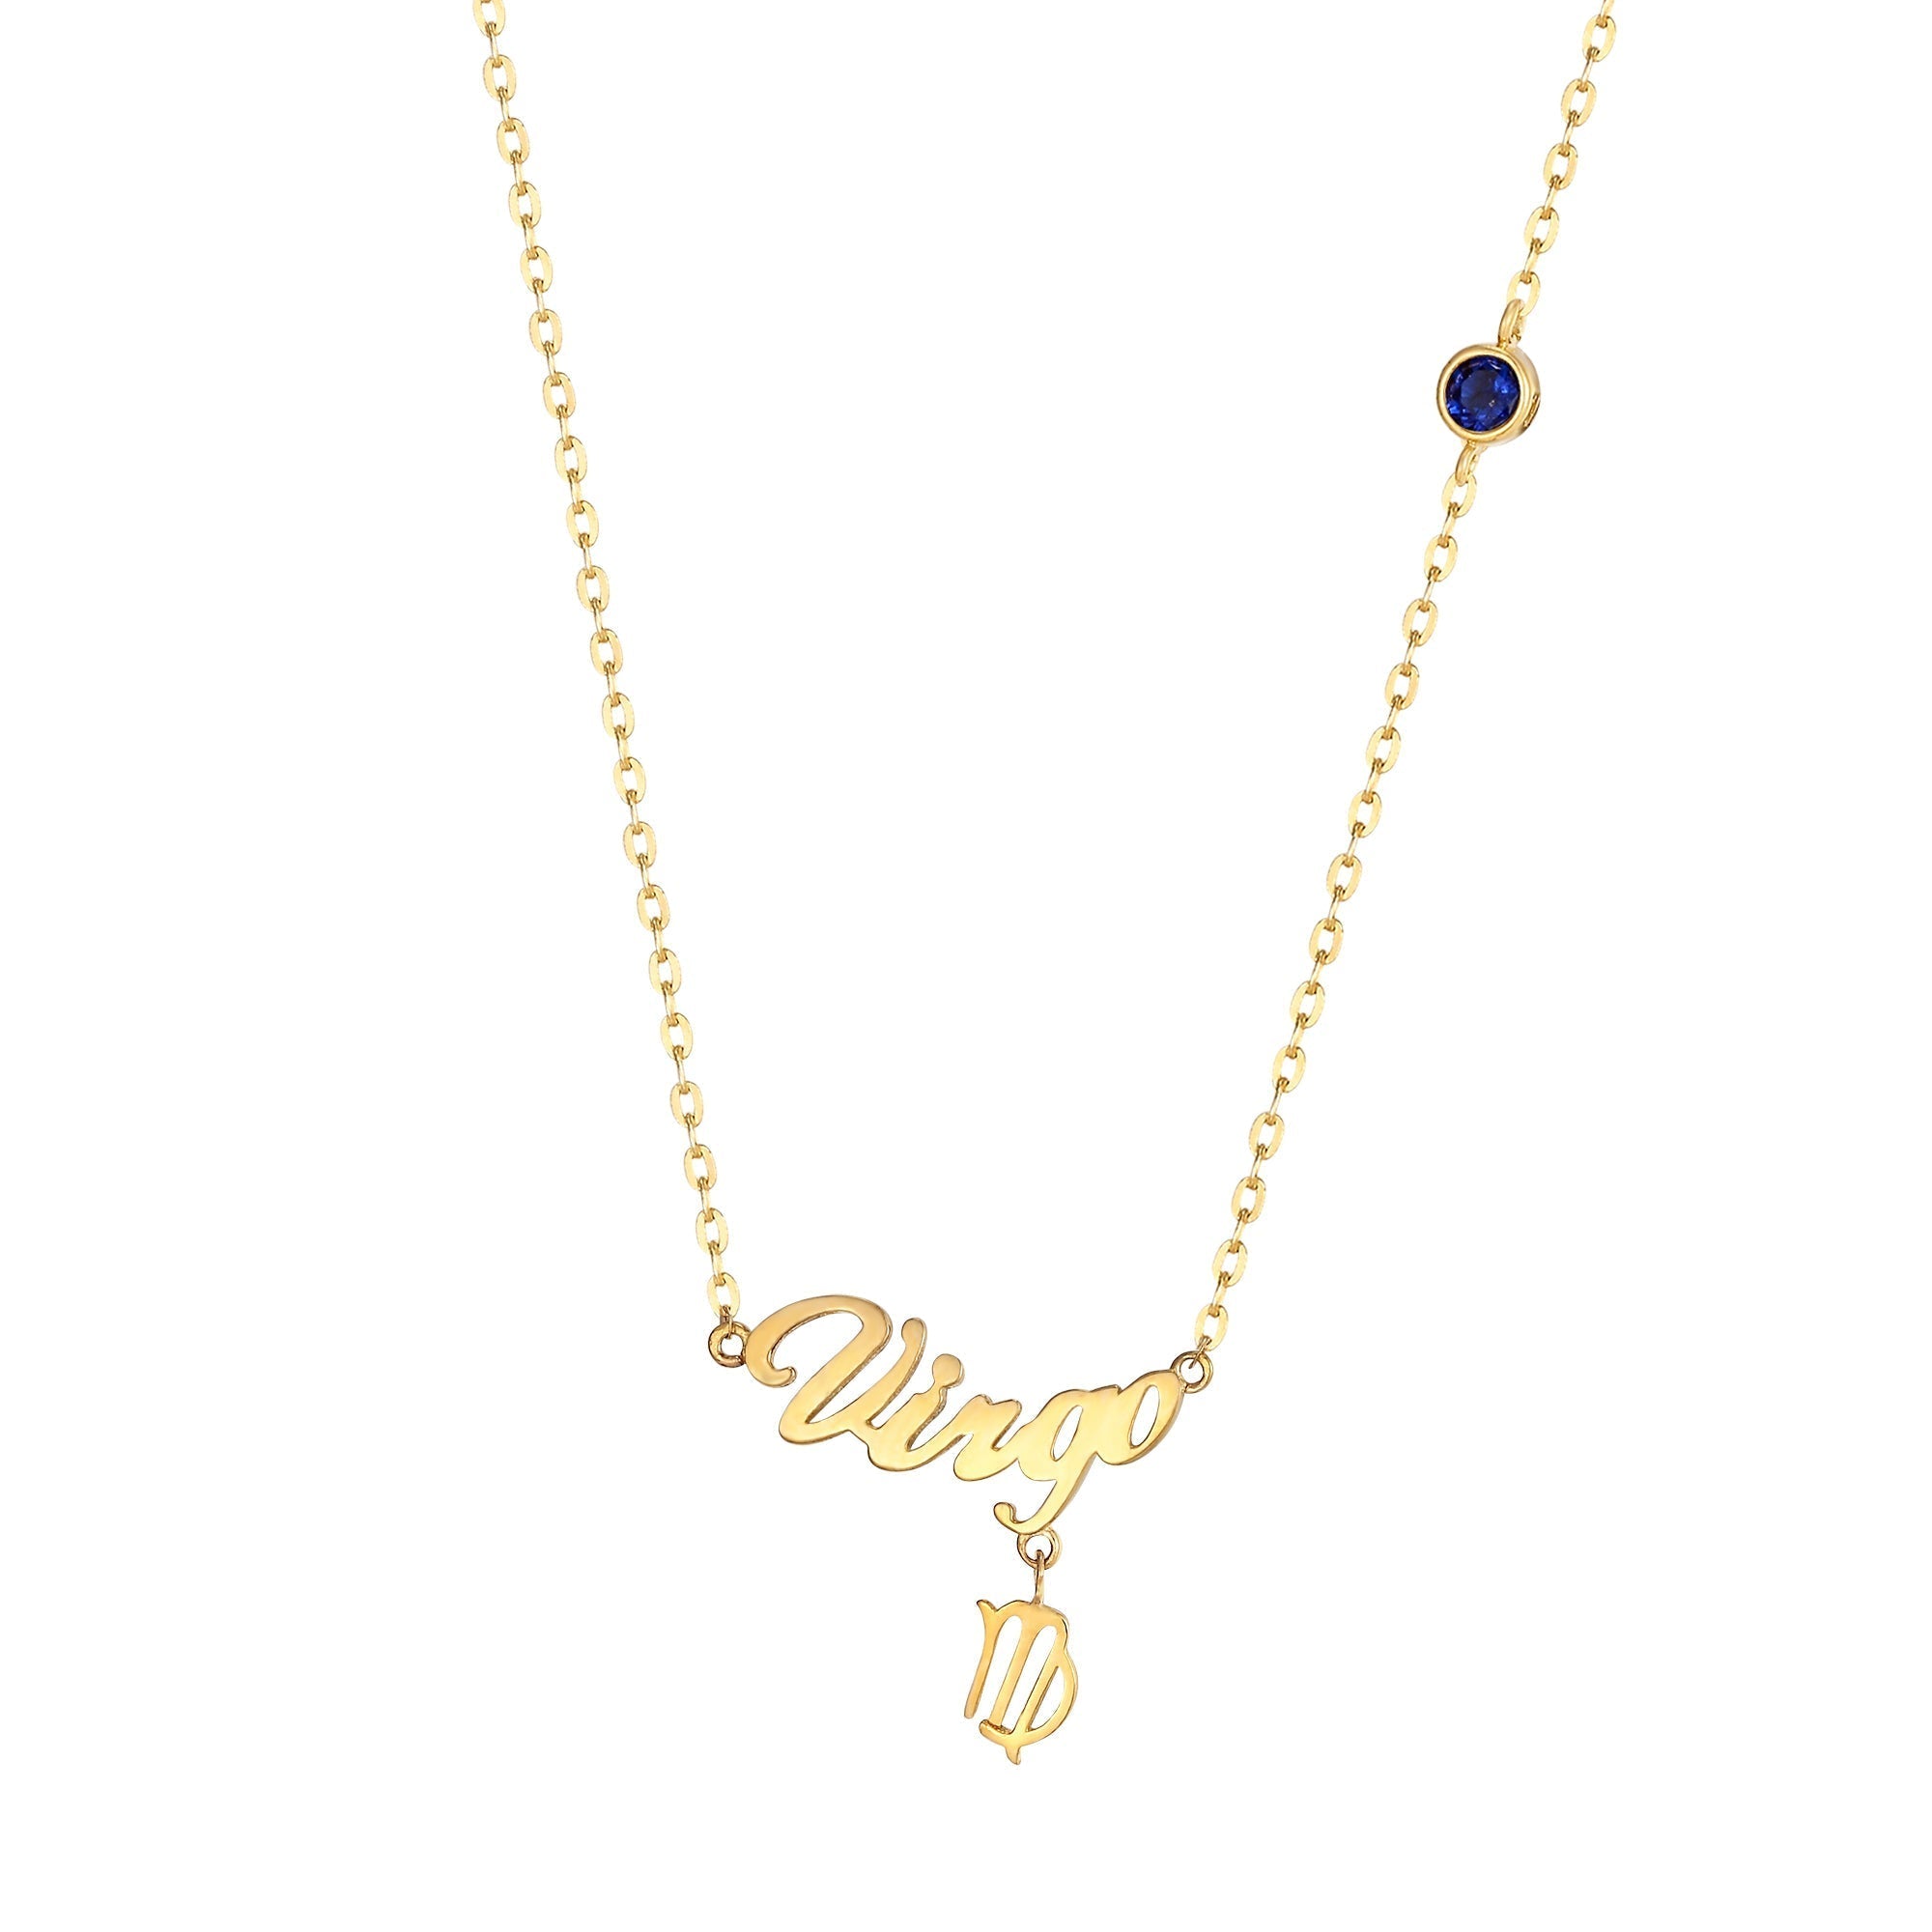 9ct gold Virgo star sign necklace - seolgold